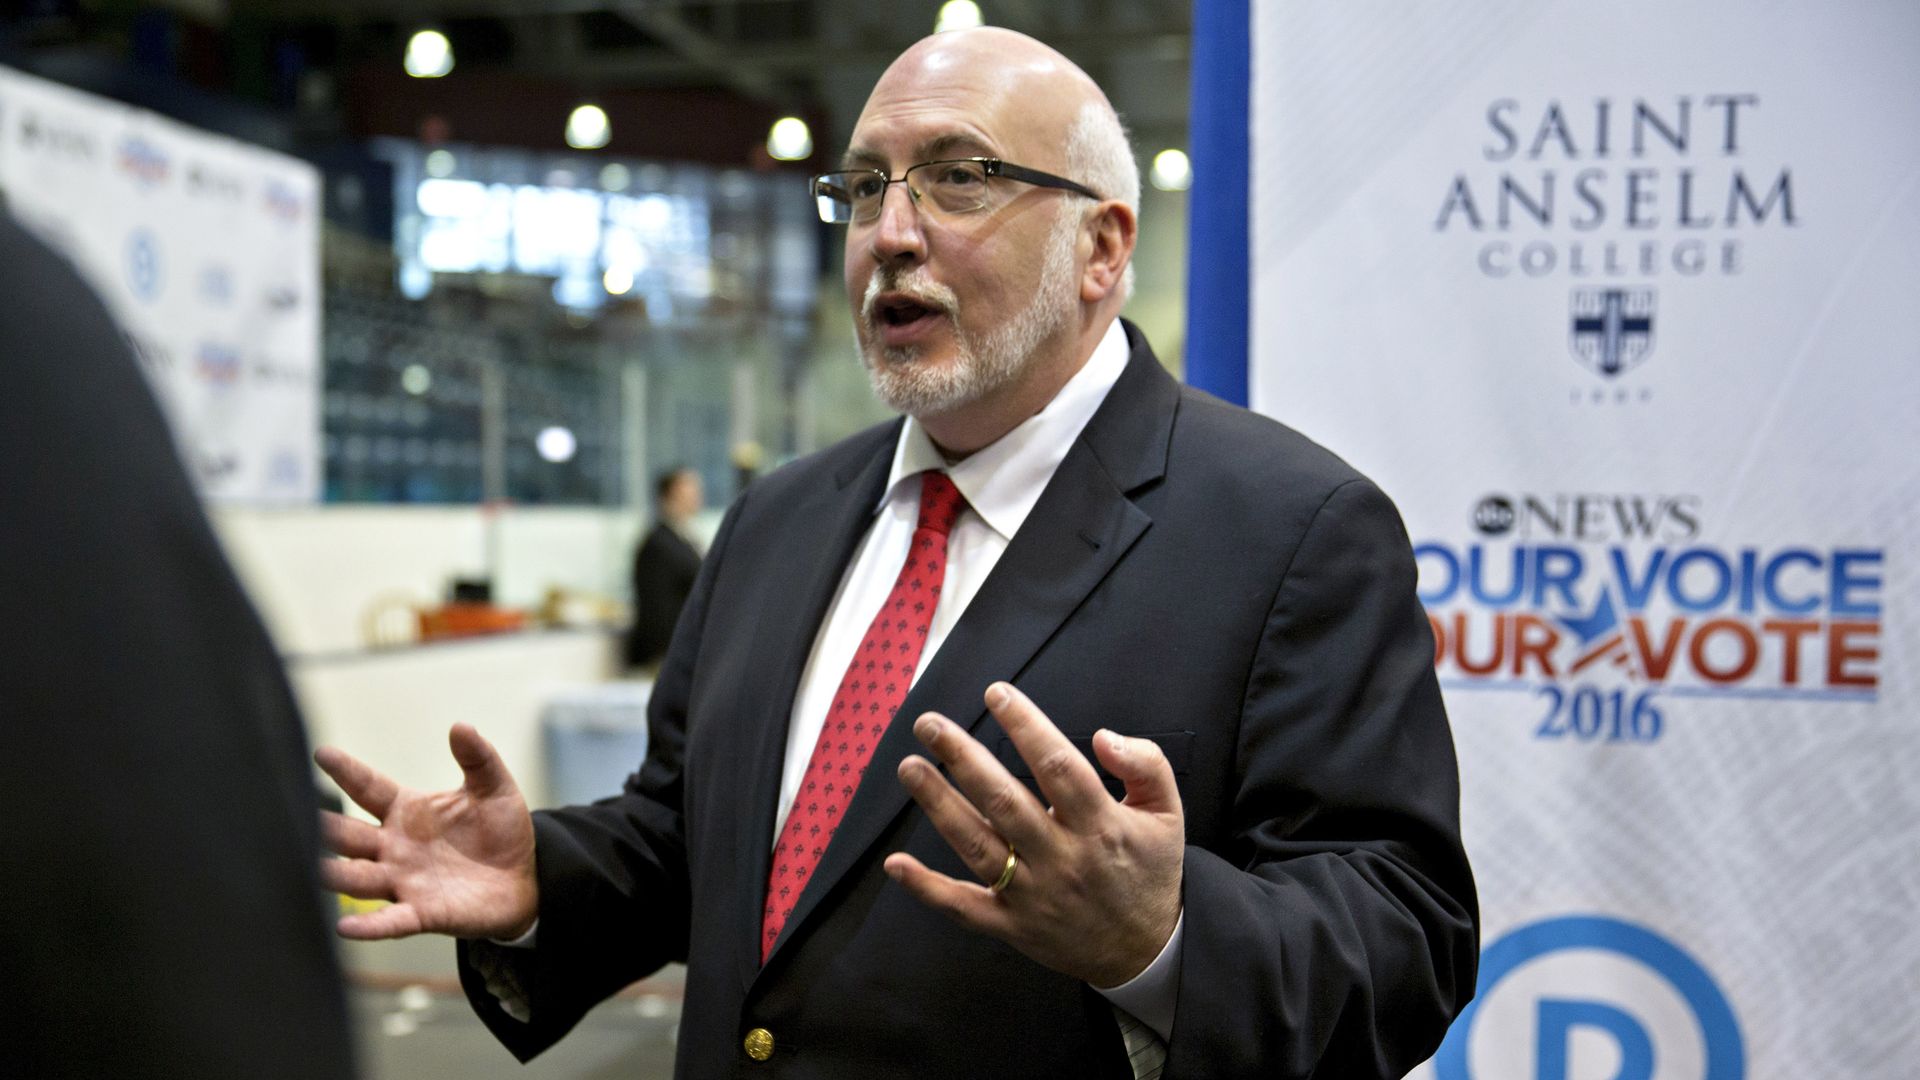 Democratic strategist Jeff Weaver is shown in a dark suit, white shirt and red tie.